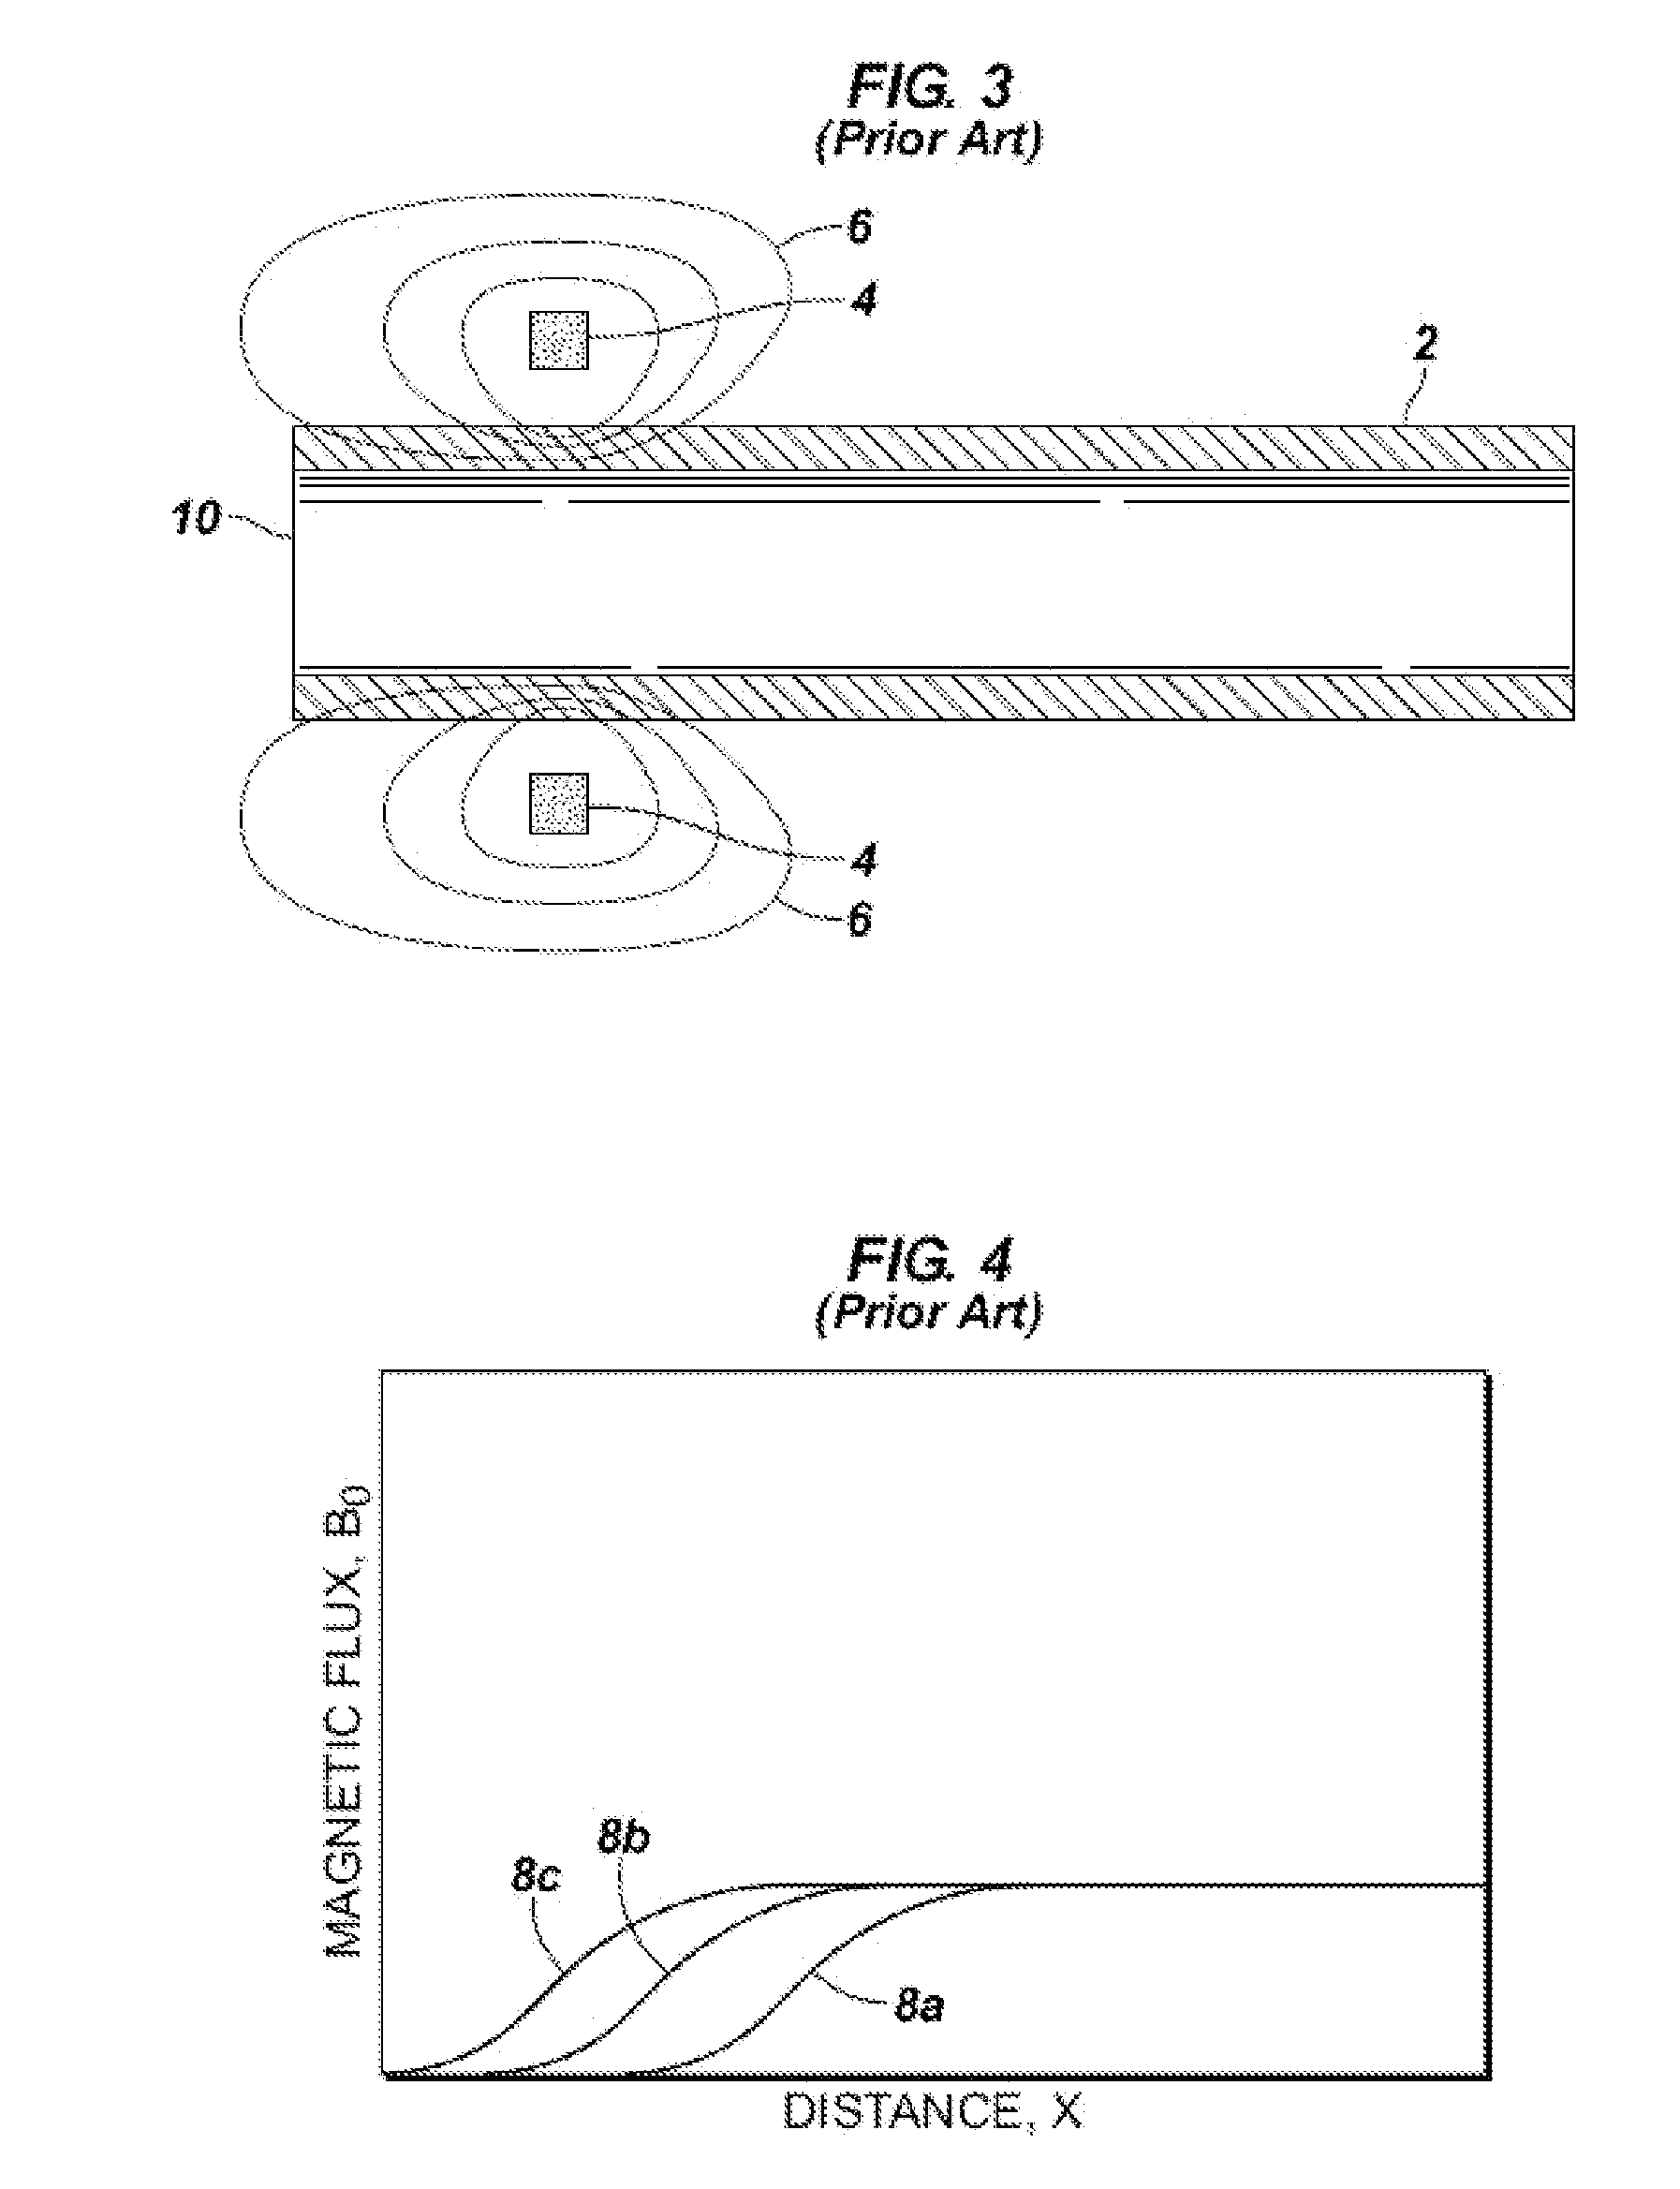 Apparatus and methods for ferromagnetic wall inspection of tubulars